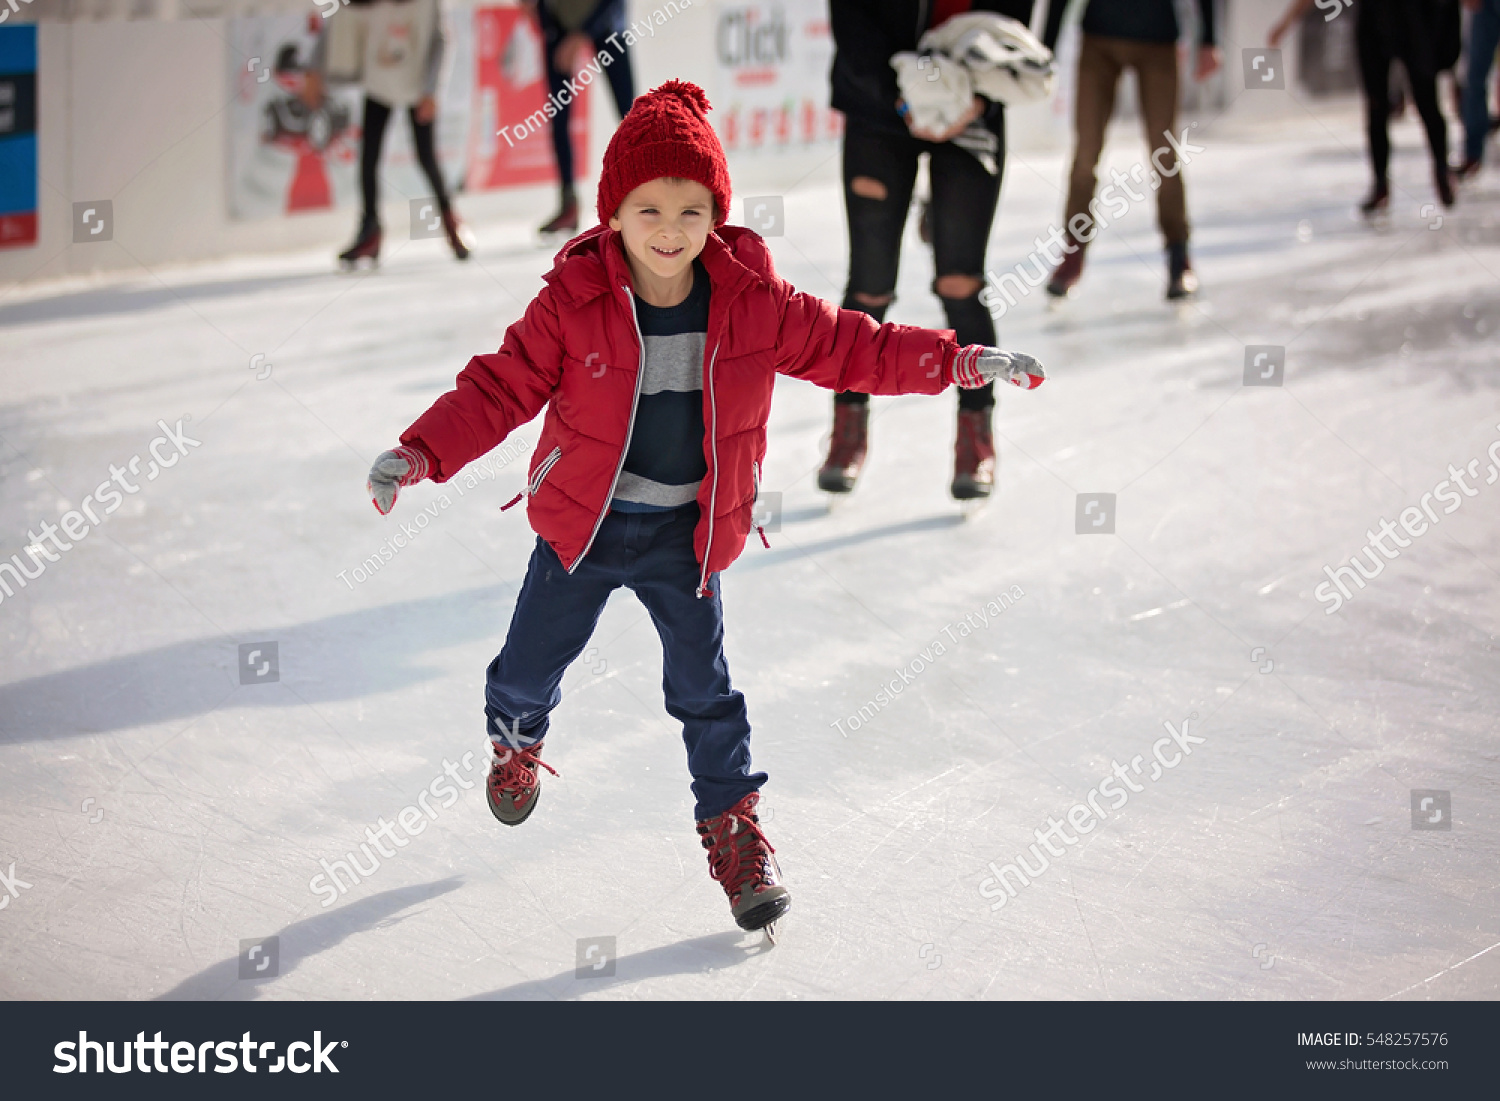 Happy boy with red hat and jacket, skating during the day, having fun #548257576